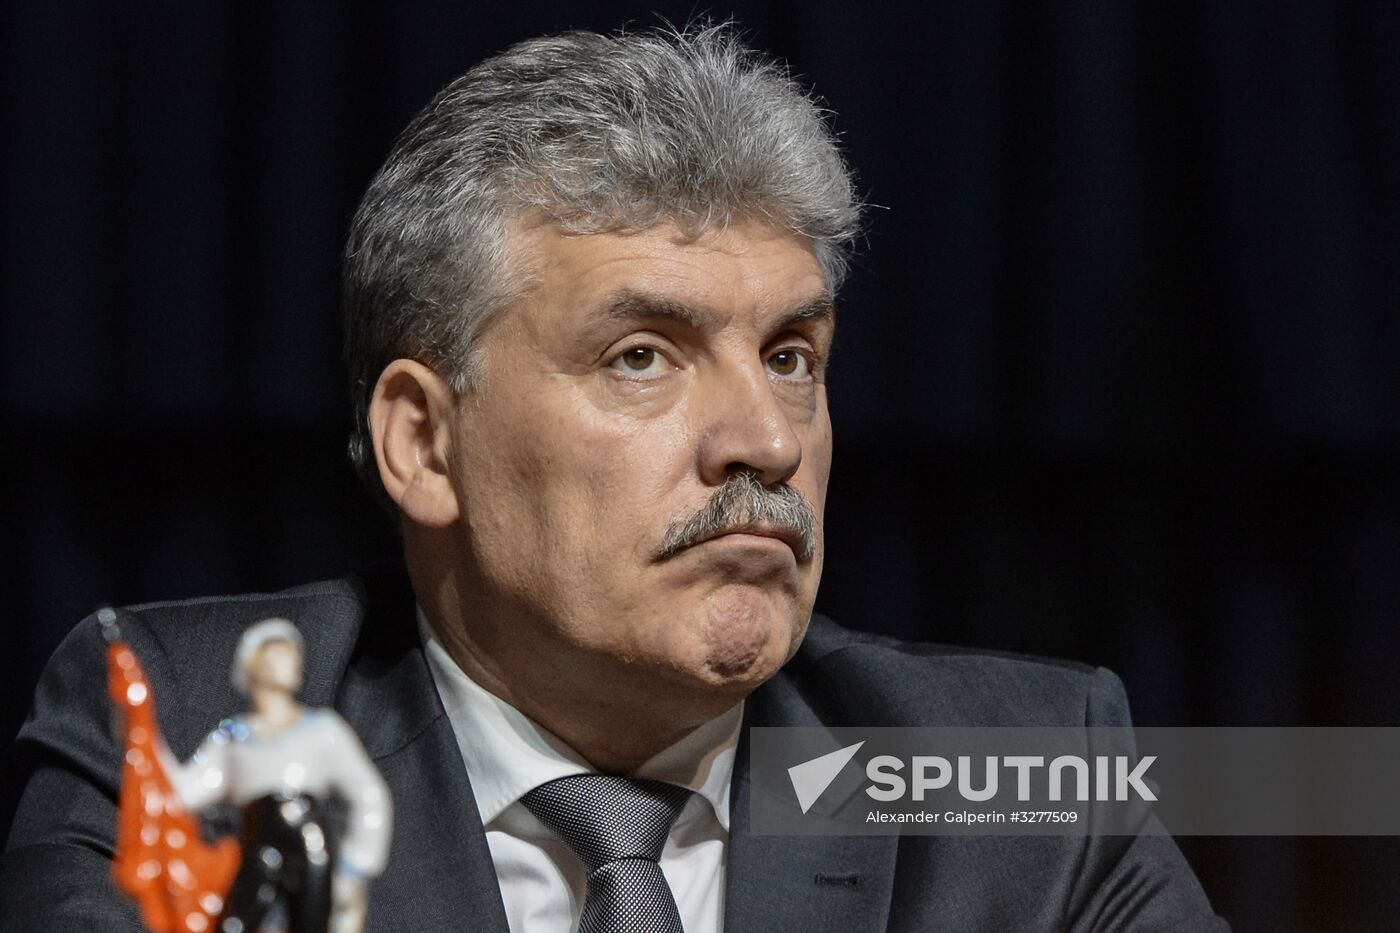 News conference of presidential candidate Pavel Grudinin in St. Petersburg